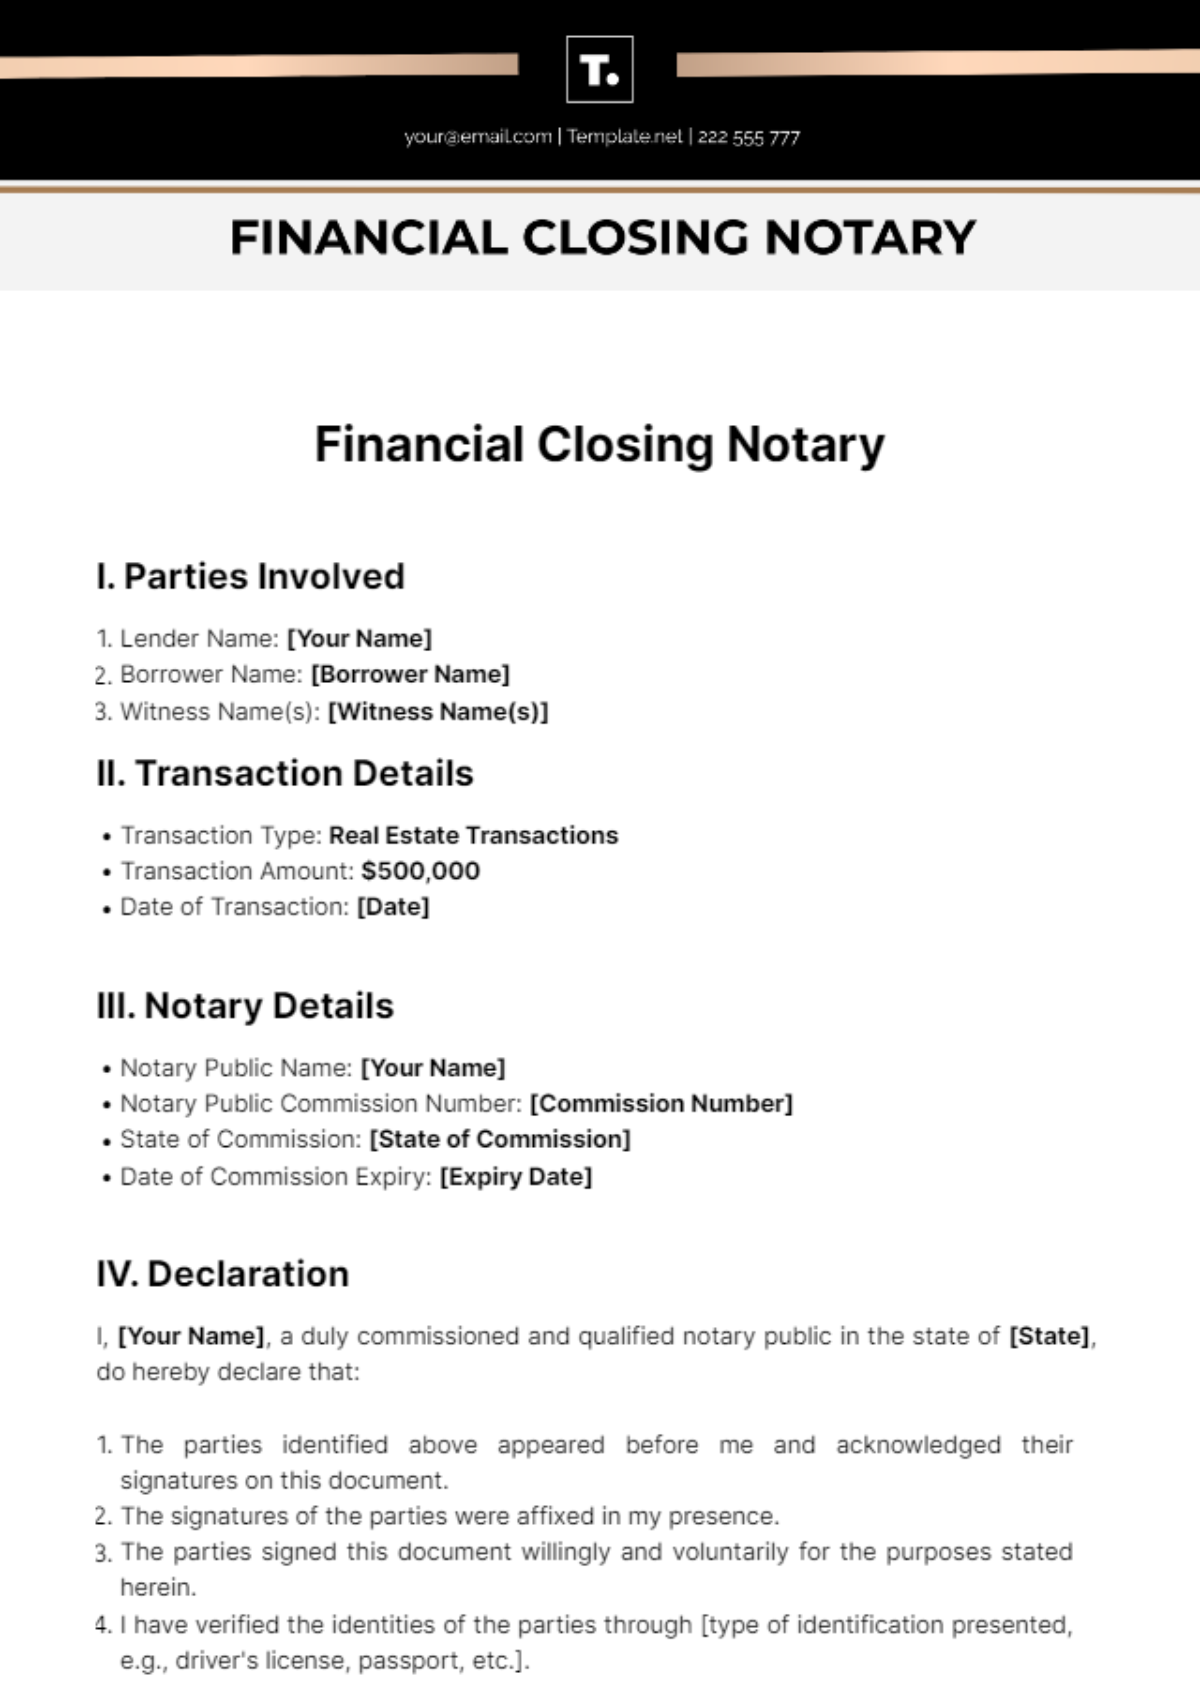 Financial Closing Notary Template